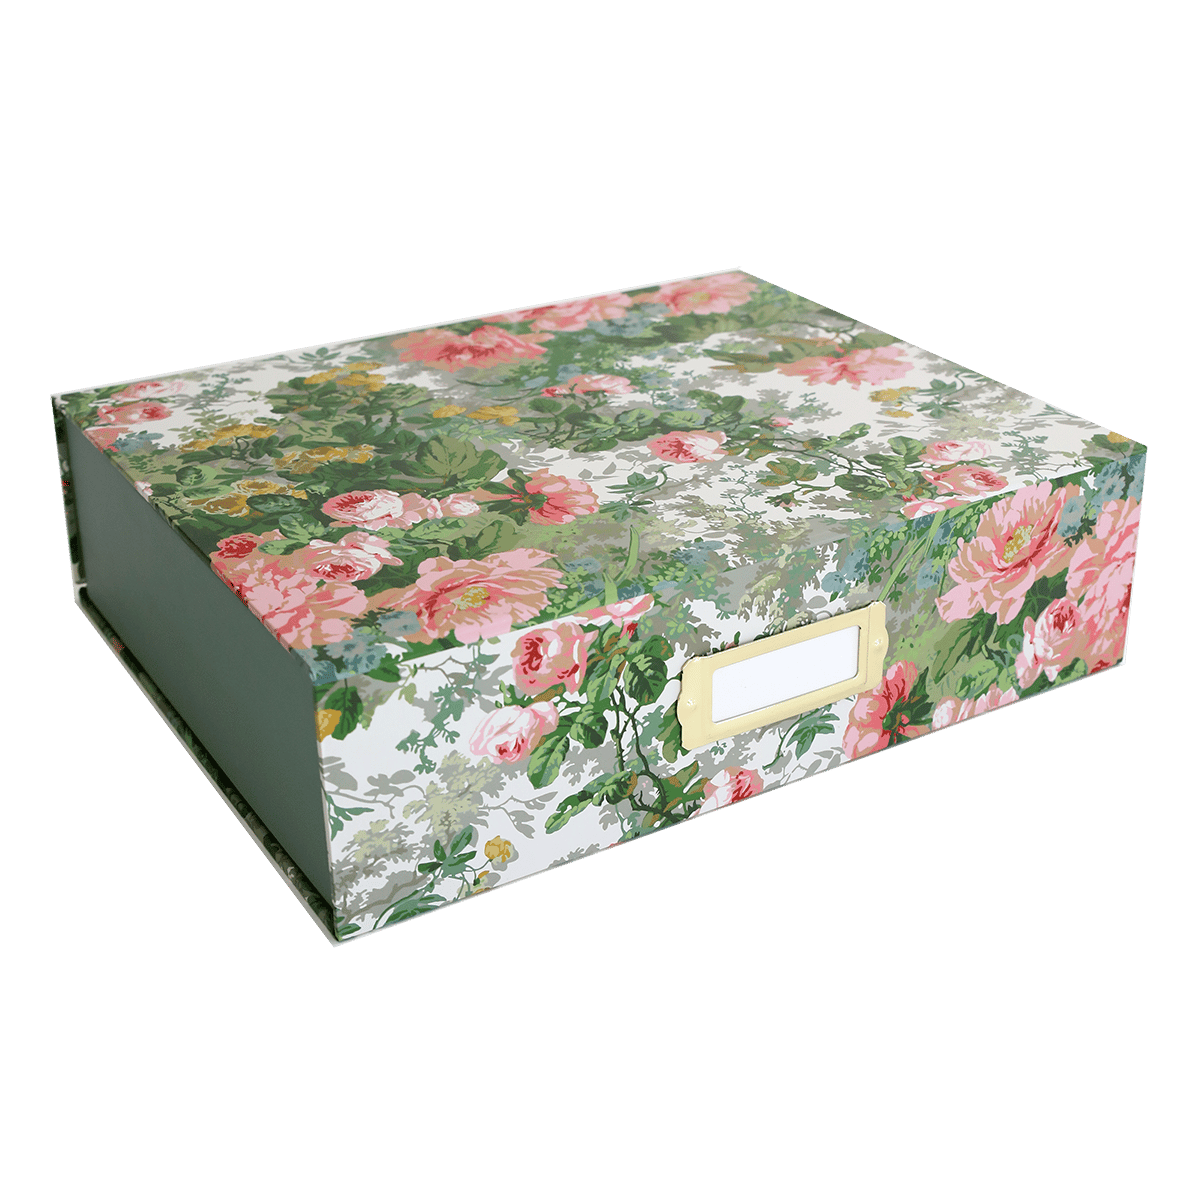 a box with a flower pattern on it.